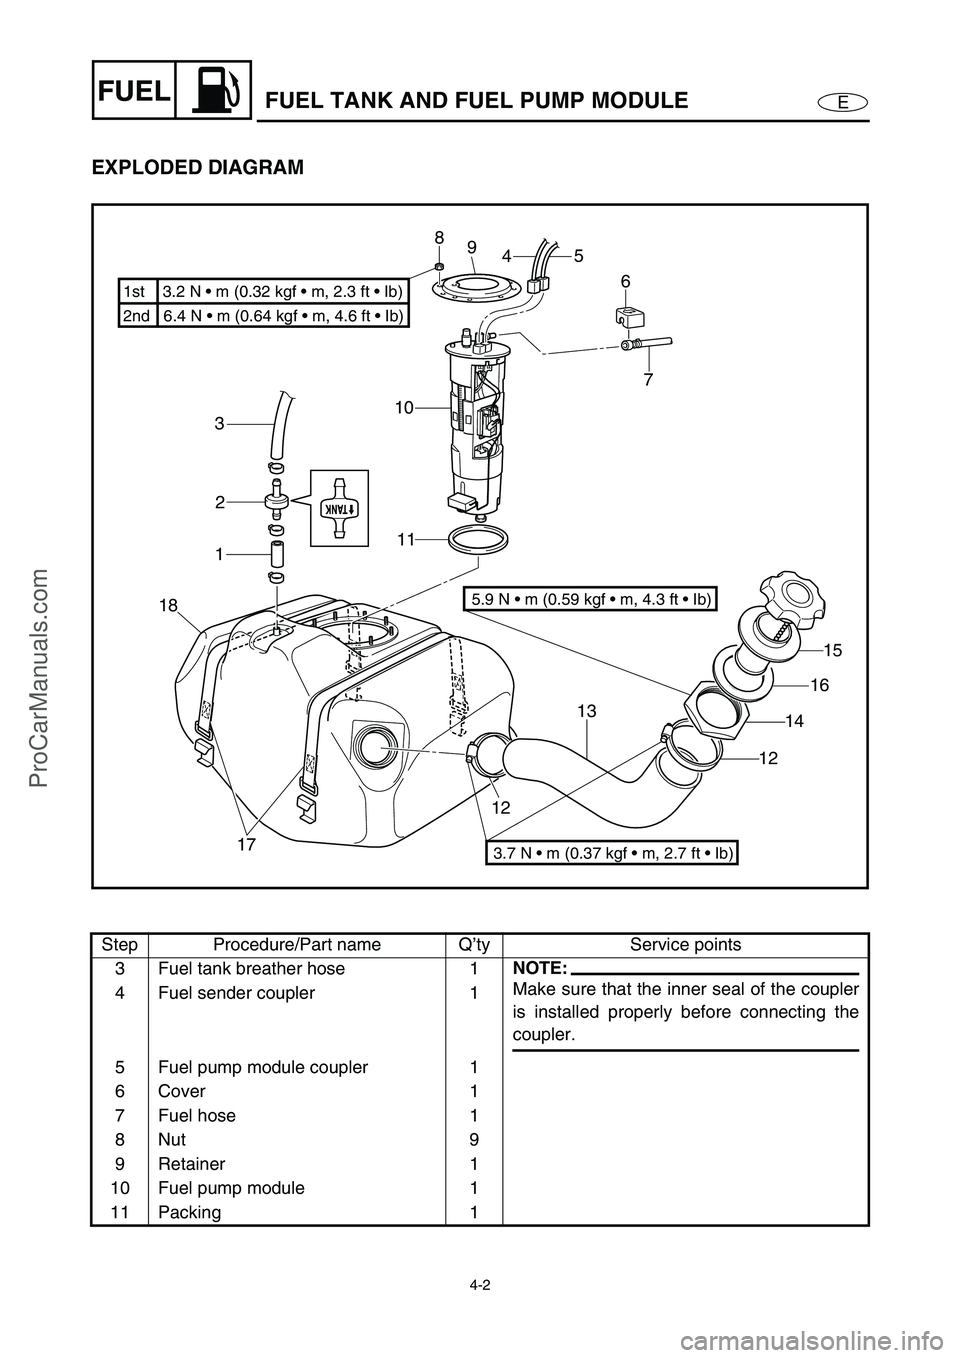 YAMAHA VX110 2005  Service Manual 4-2
EFUELFUEL TANK AND FUEL PUMP MODULE
EXPLODED DIAGRAM
Step Procedure/Part name Q’ty Service points
3 Fuel tank breather hose 1
NOTE:
Make sure that the inner seal of the coupler
is installed prop